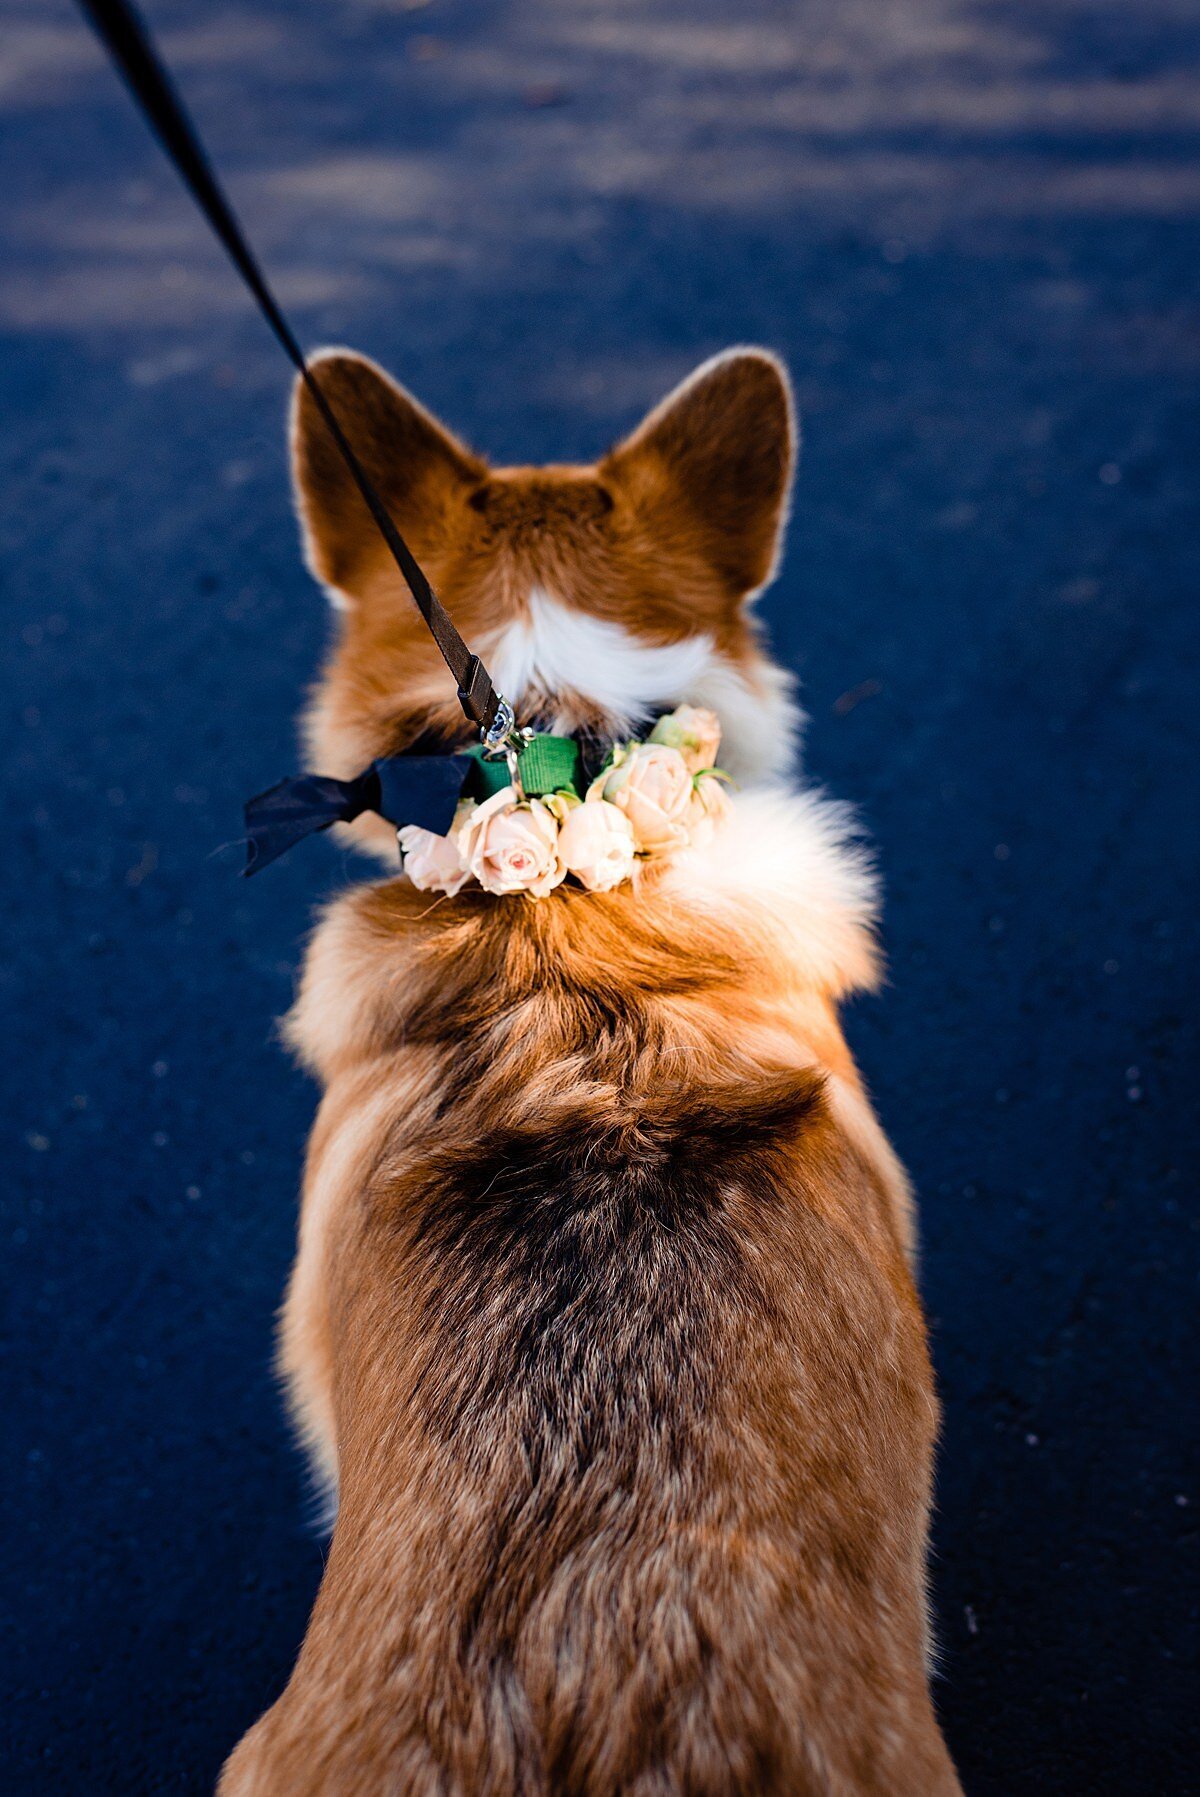 The dog of honor is facing away from the camera showing off his floral dog collar with peach roses and greenery.